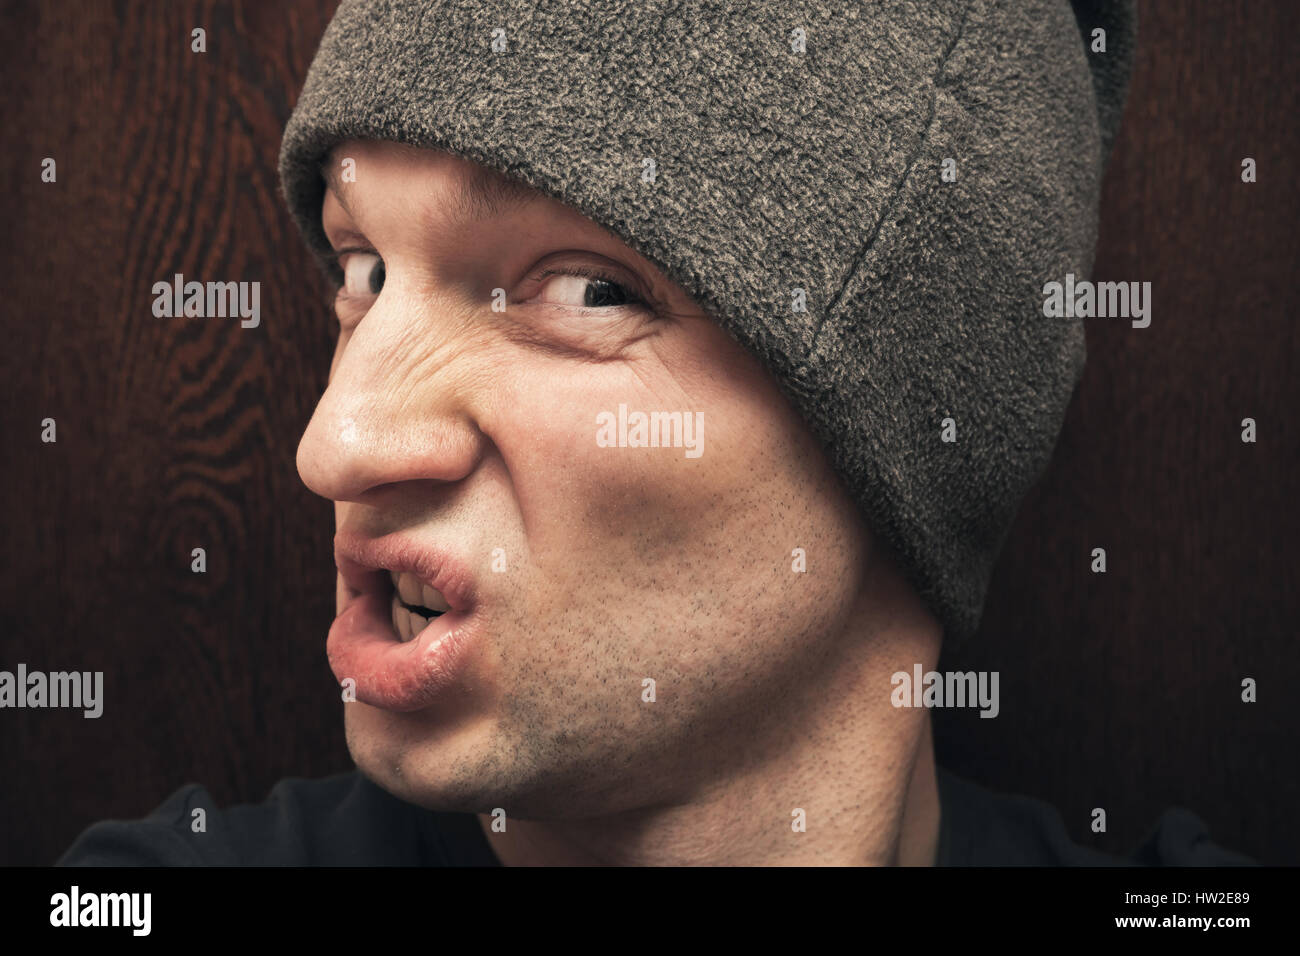 Young agressive Caucasian man in gray hat. Close up studio face portrait on dark wooden wall background, selective focus Stock Photo